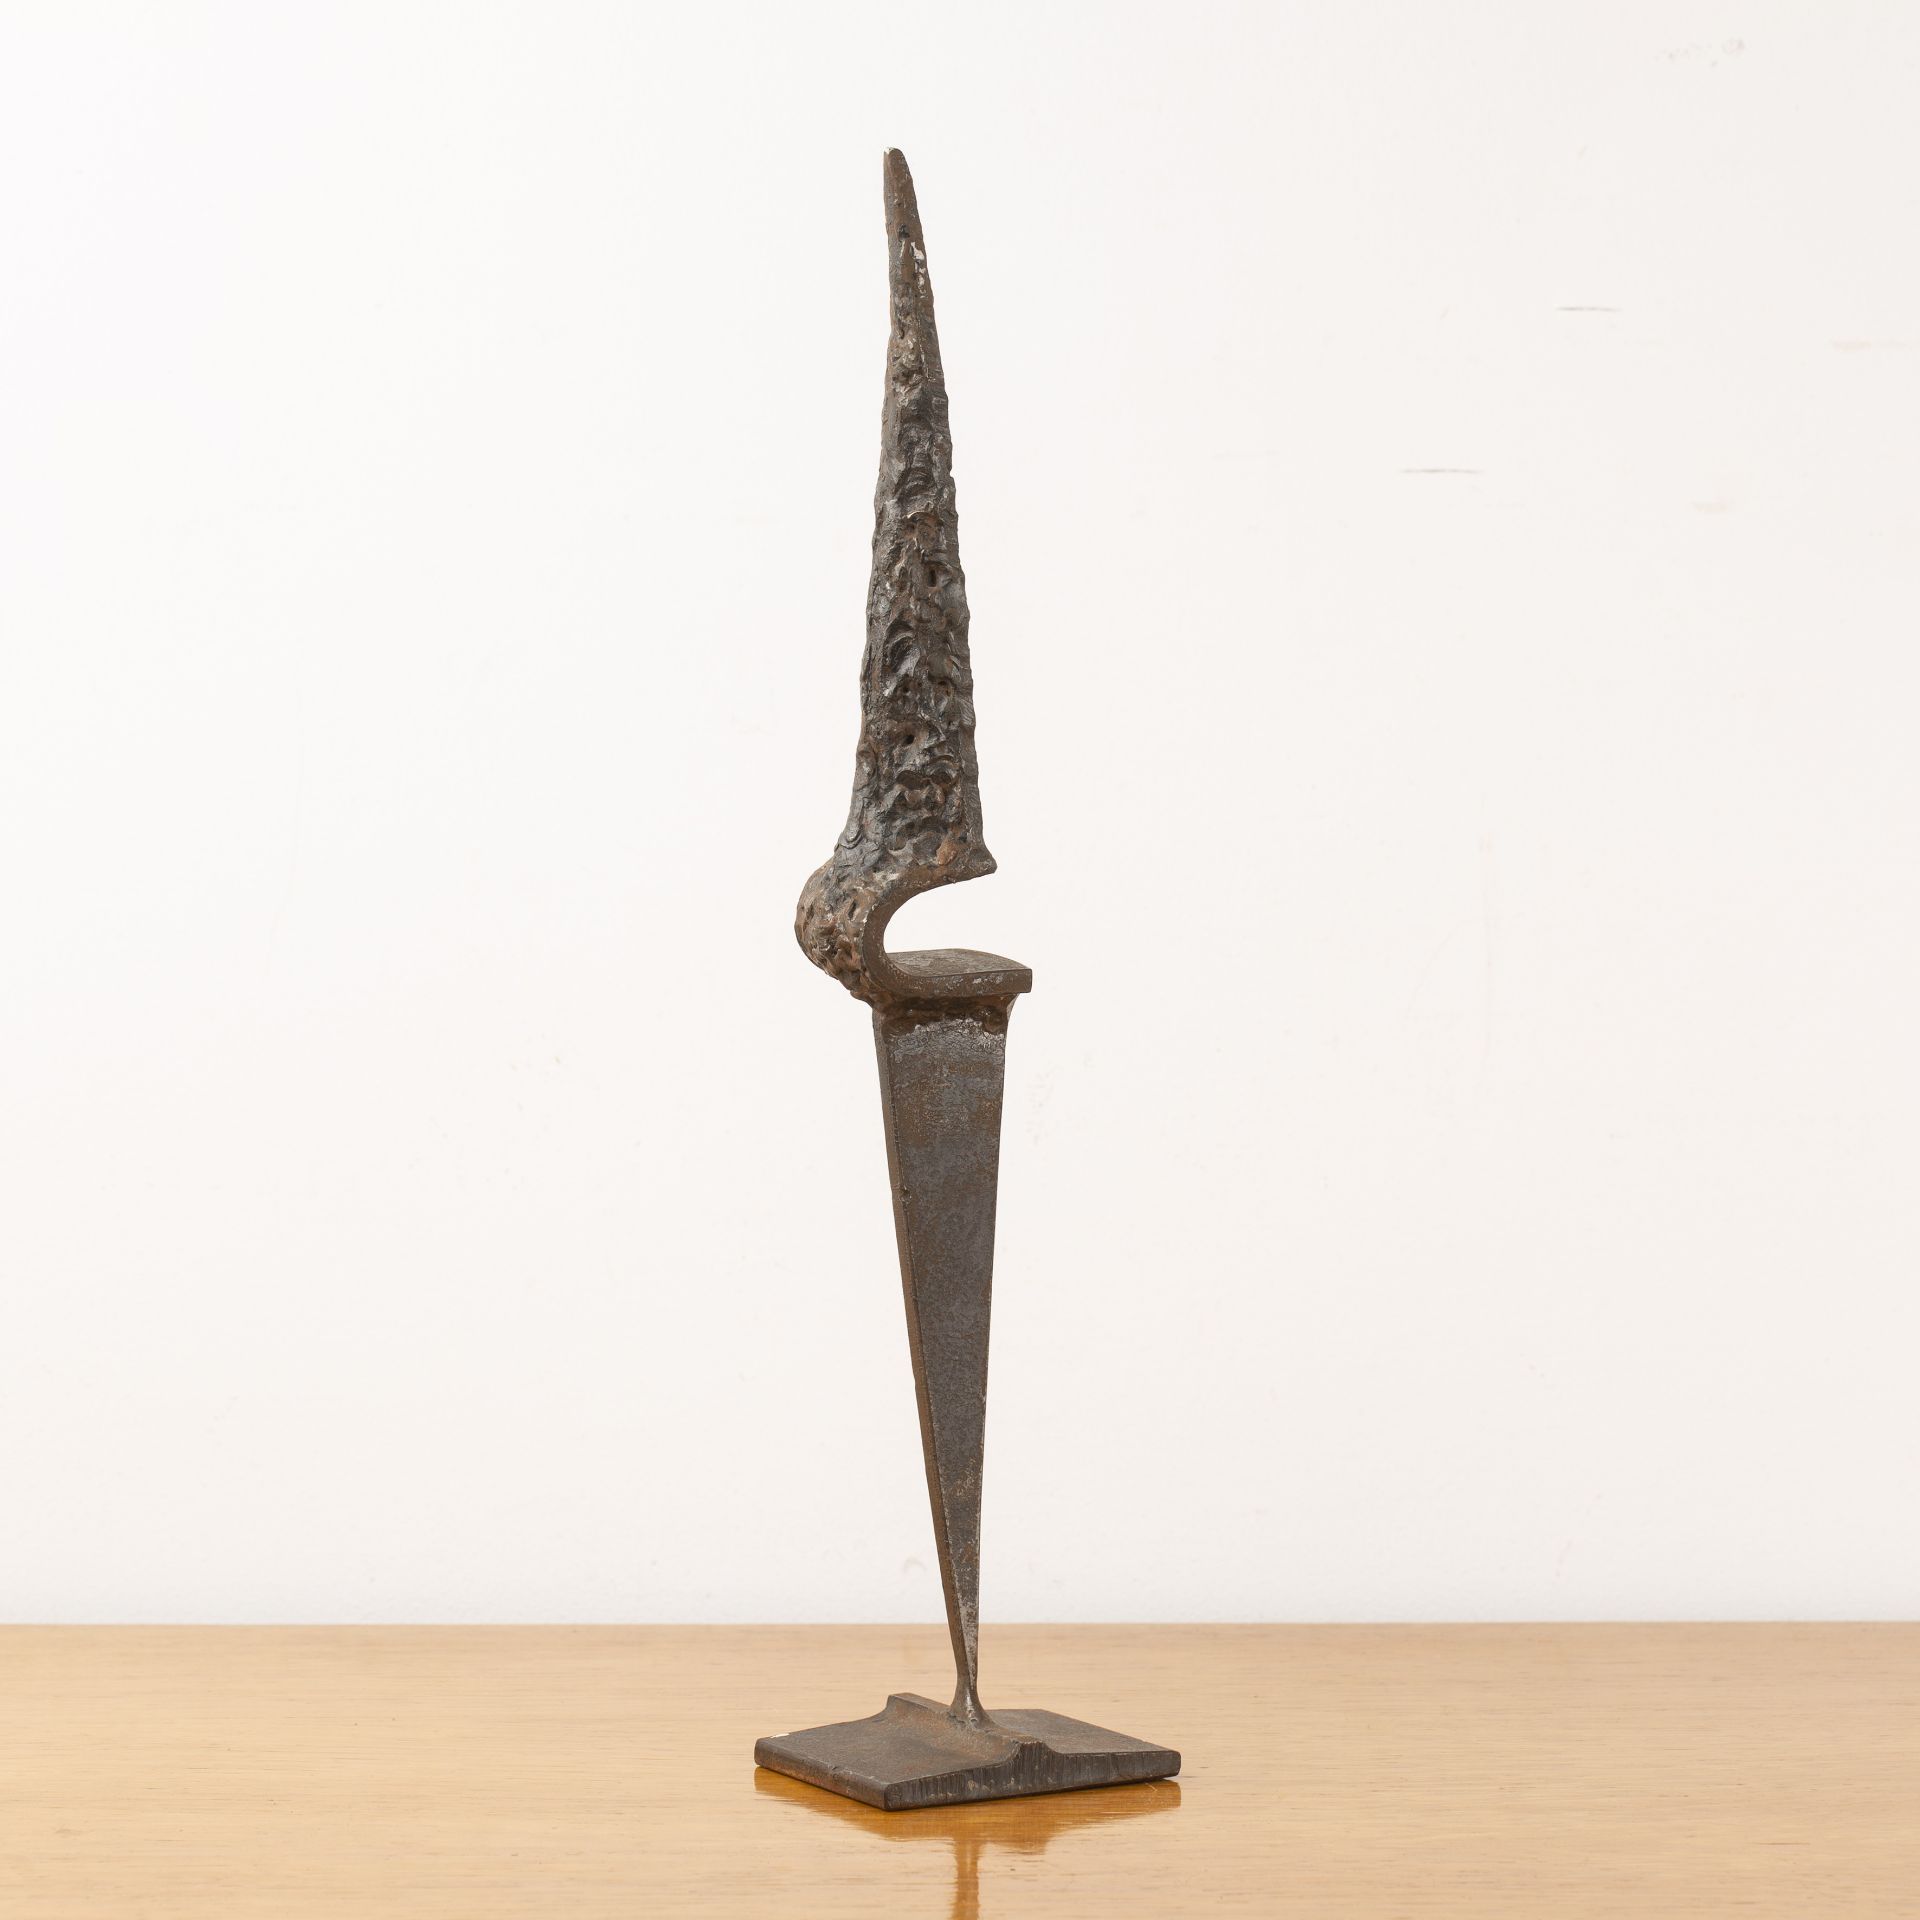 Attributed to George Pickard (1929-1993) 'Sharp point', iron sculpture, unsigned, 42cm high - Image 2 of 4